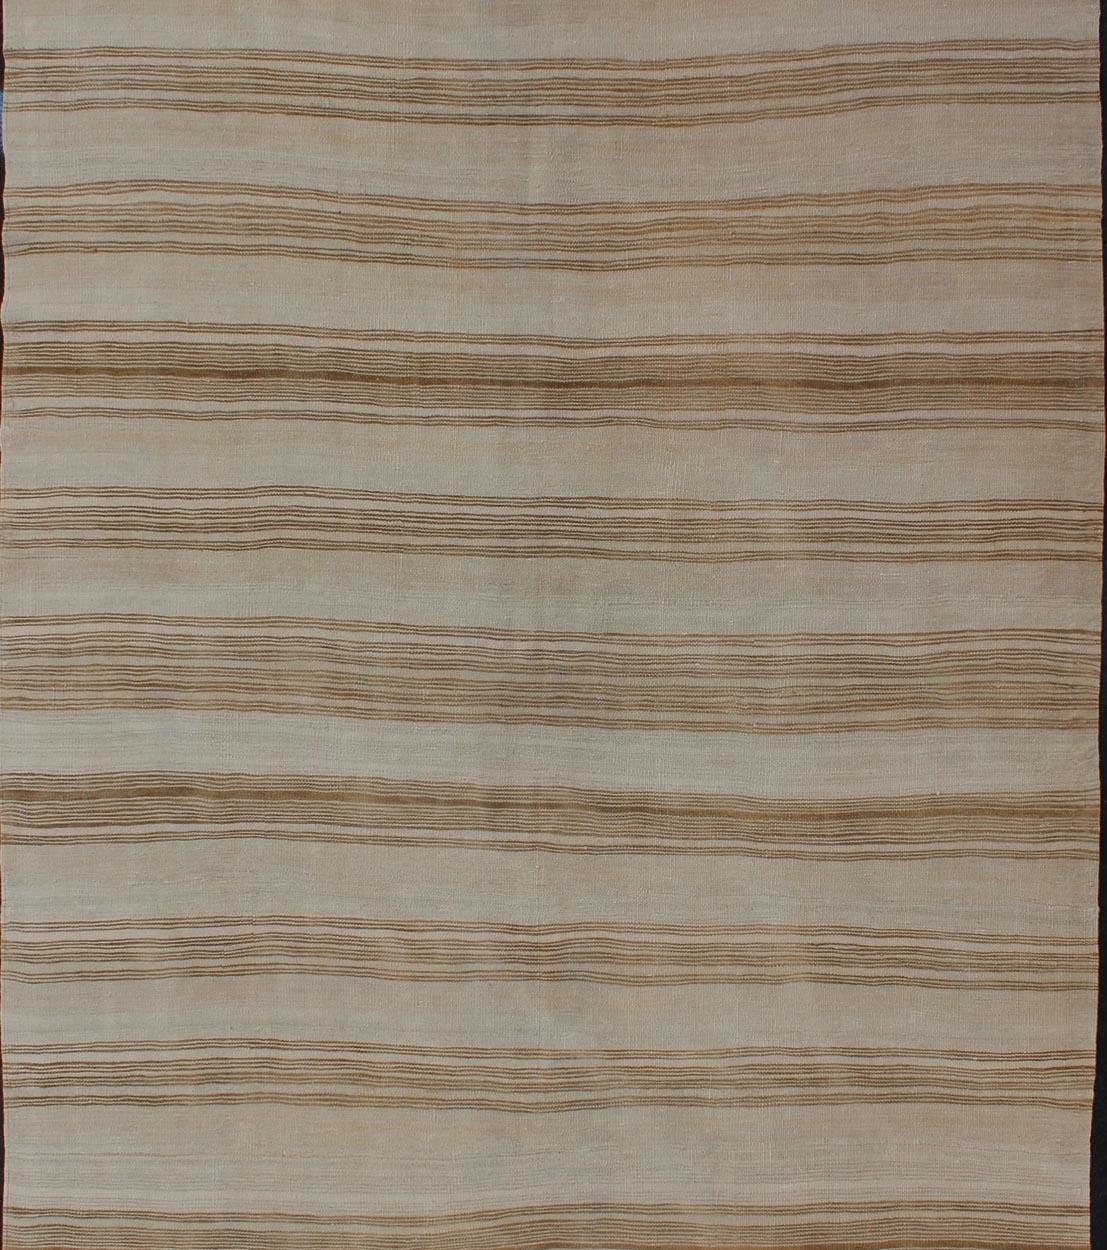 Vintage Turkish Flat-Weave Striped Kilim in Taupe, Brown and Tan Colors In Good Condition For Sale In Atlanta, GA